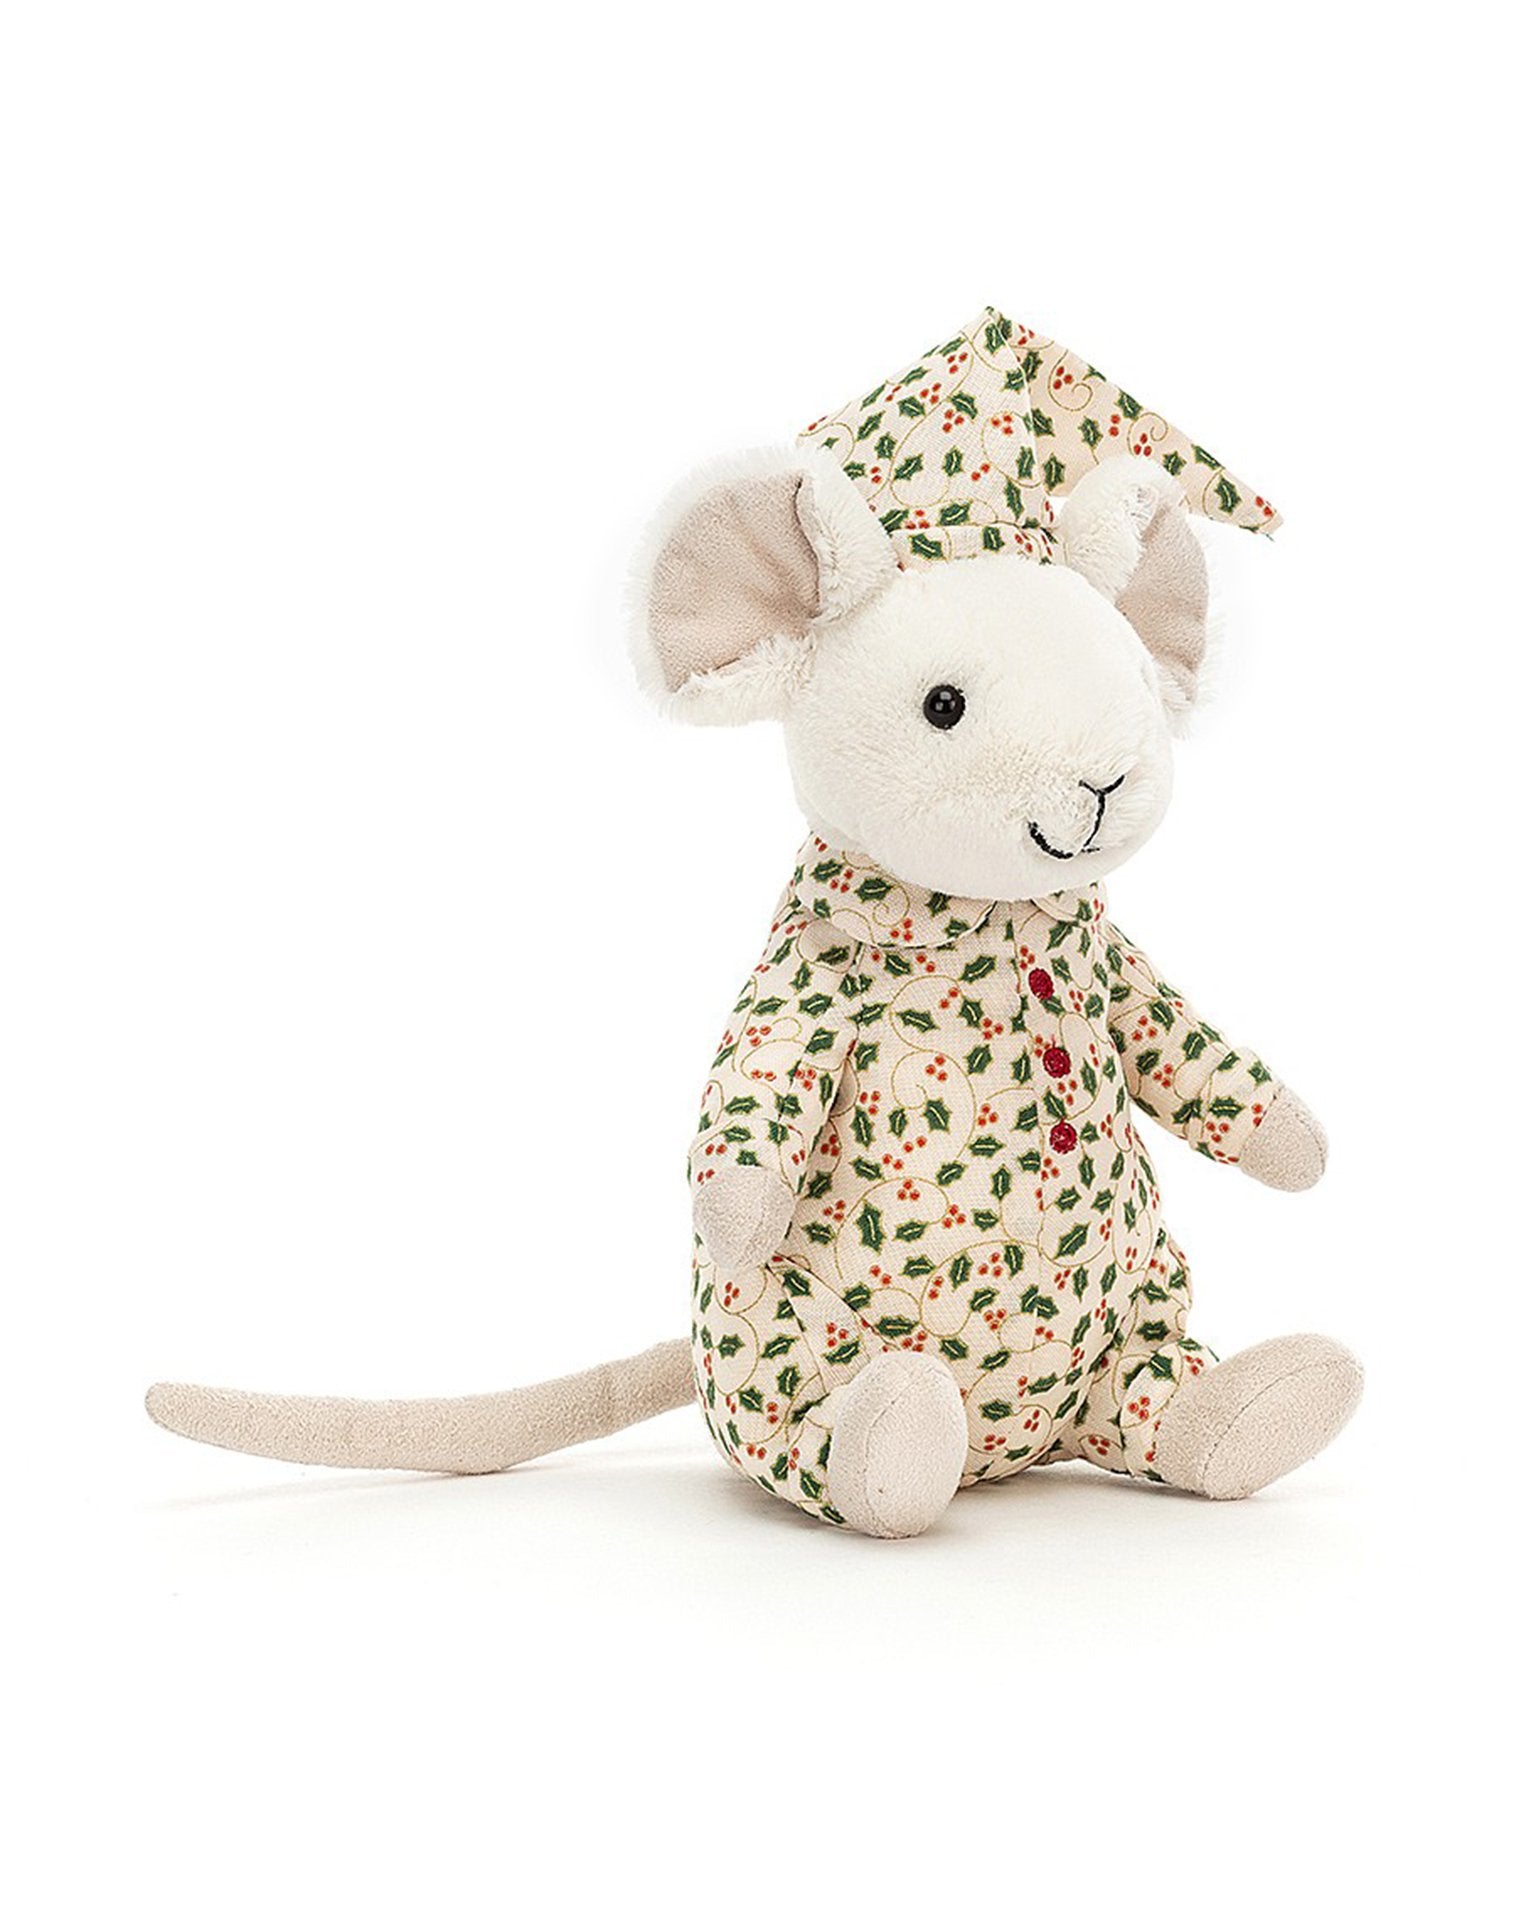 Little jellycat play merry mouse bedtime